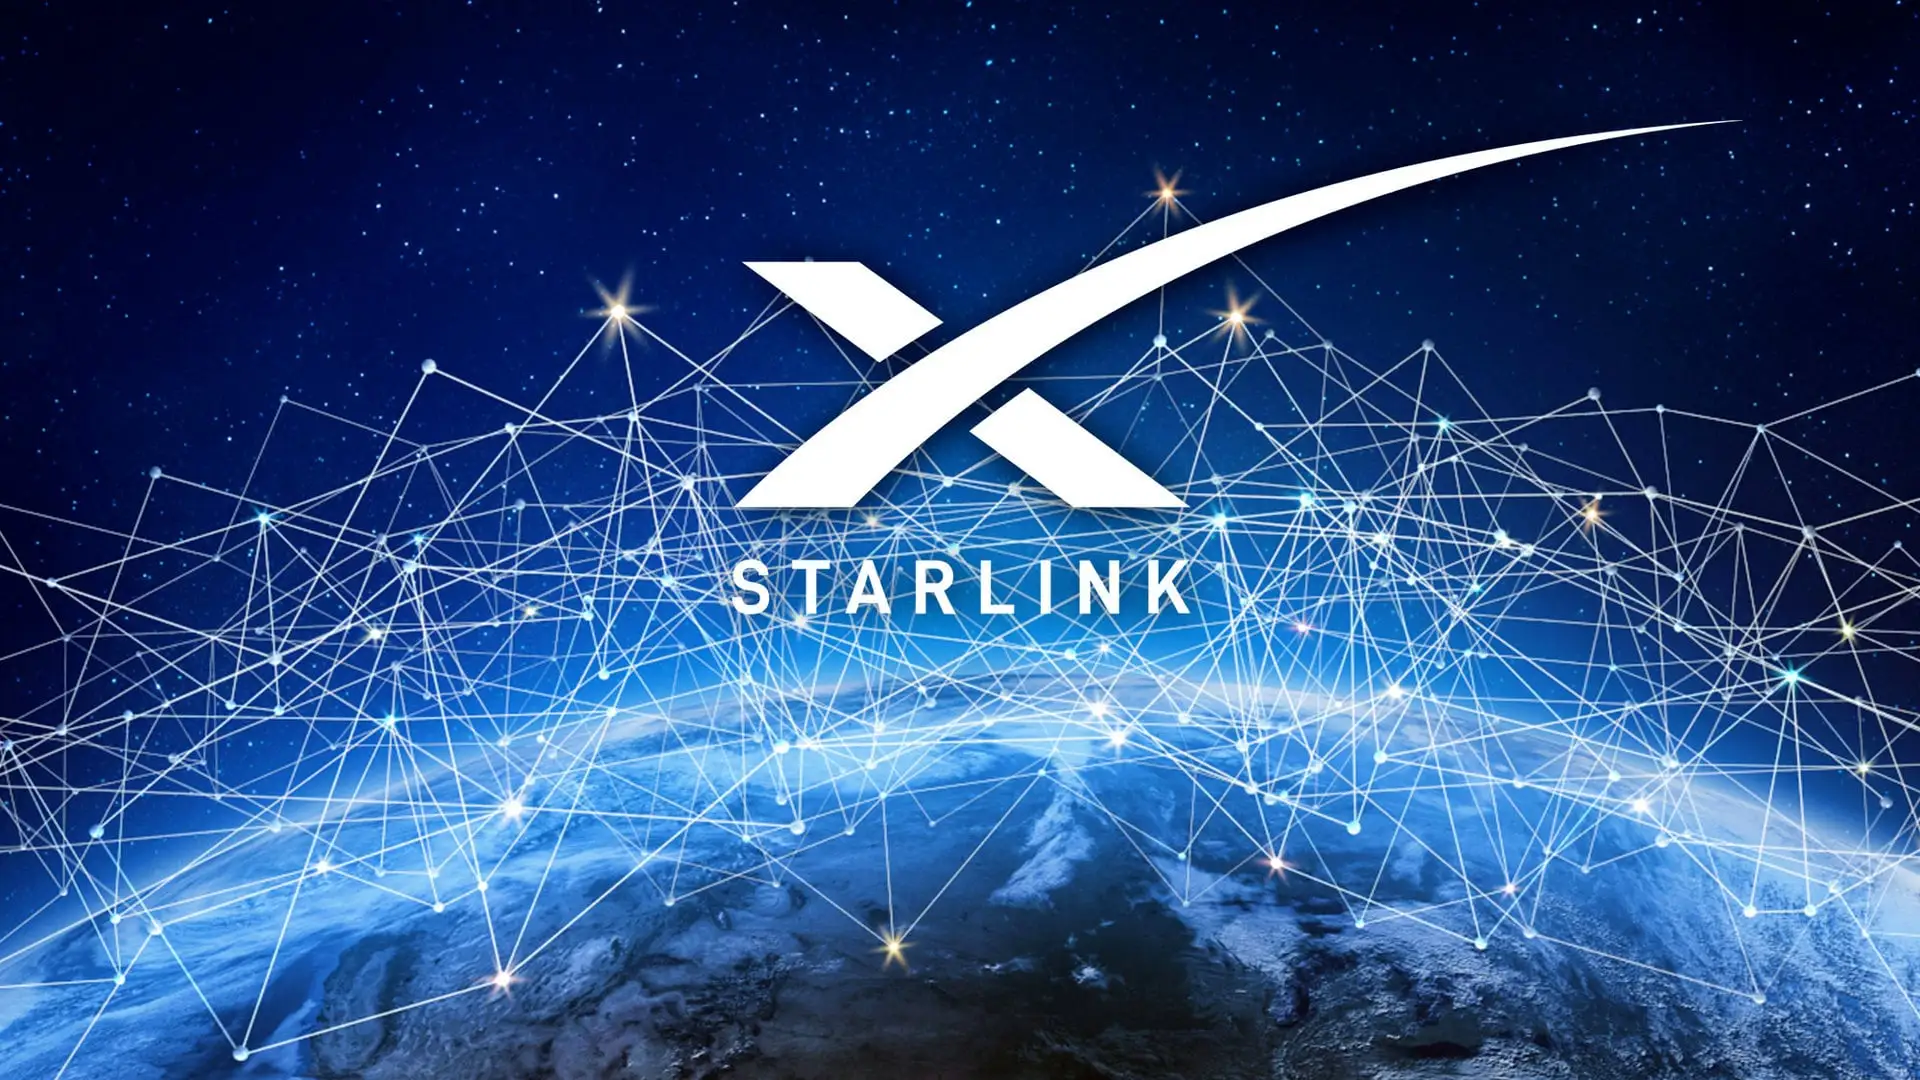 starlink-recommends-2-alternative-payment-channels-for-nigerians-to-order-its-hardware